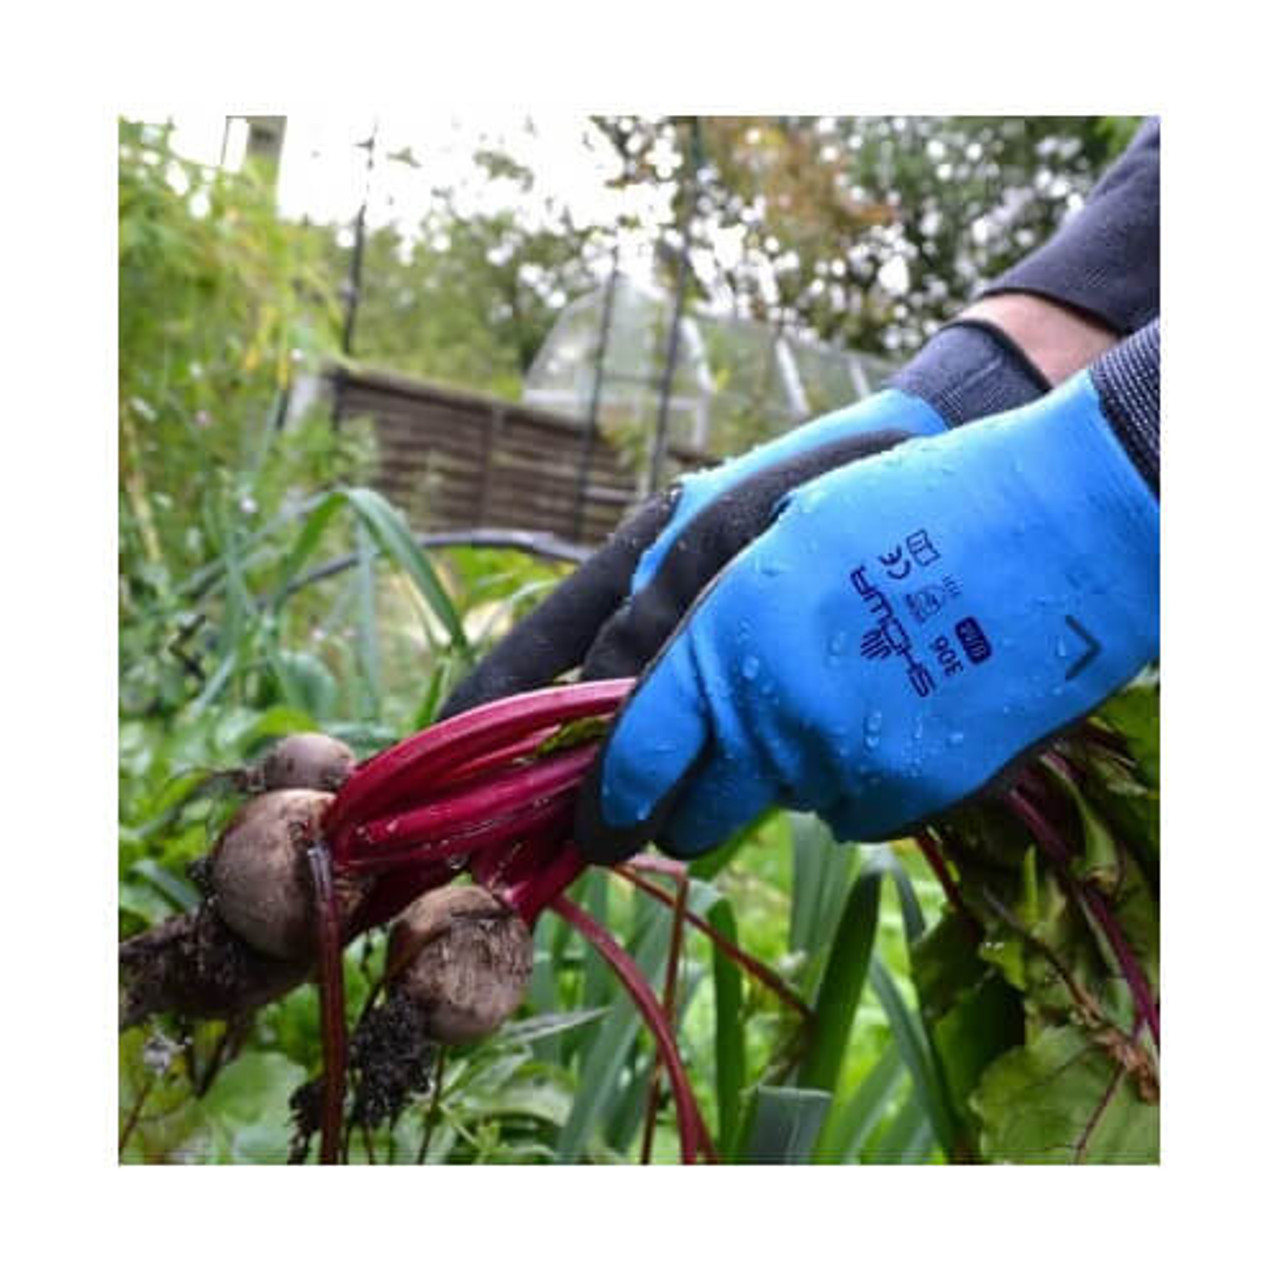 Gardeners love the Showa 306 Glove for keeping out the rain